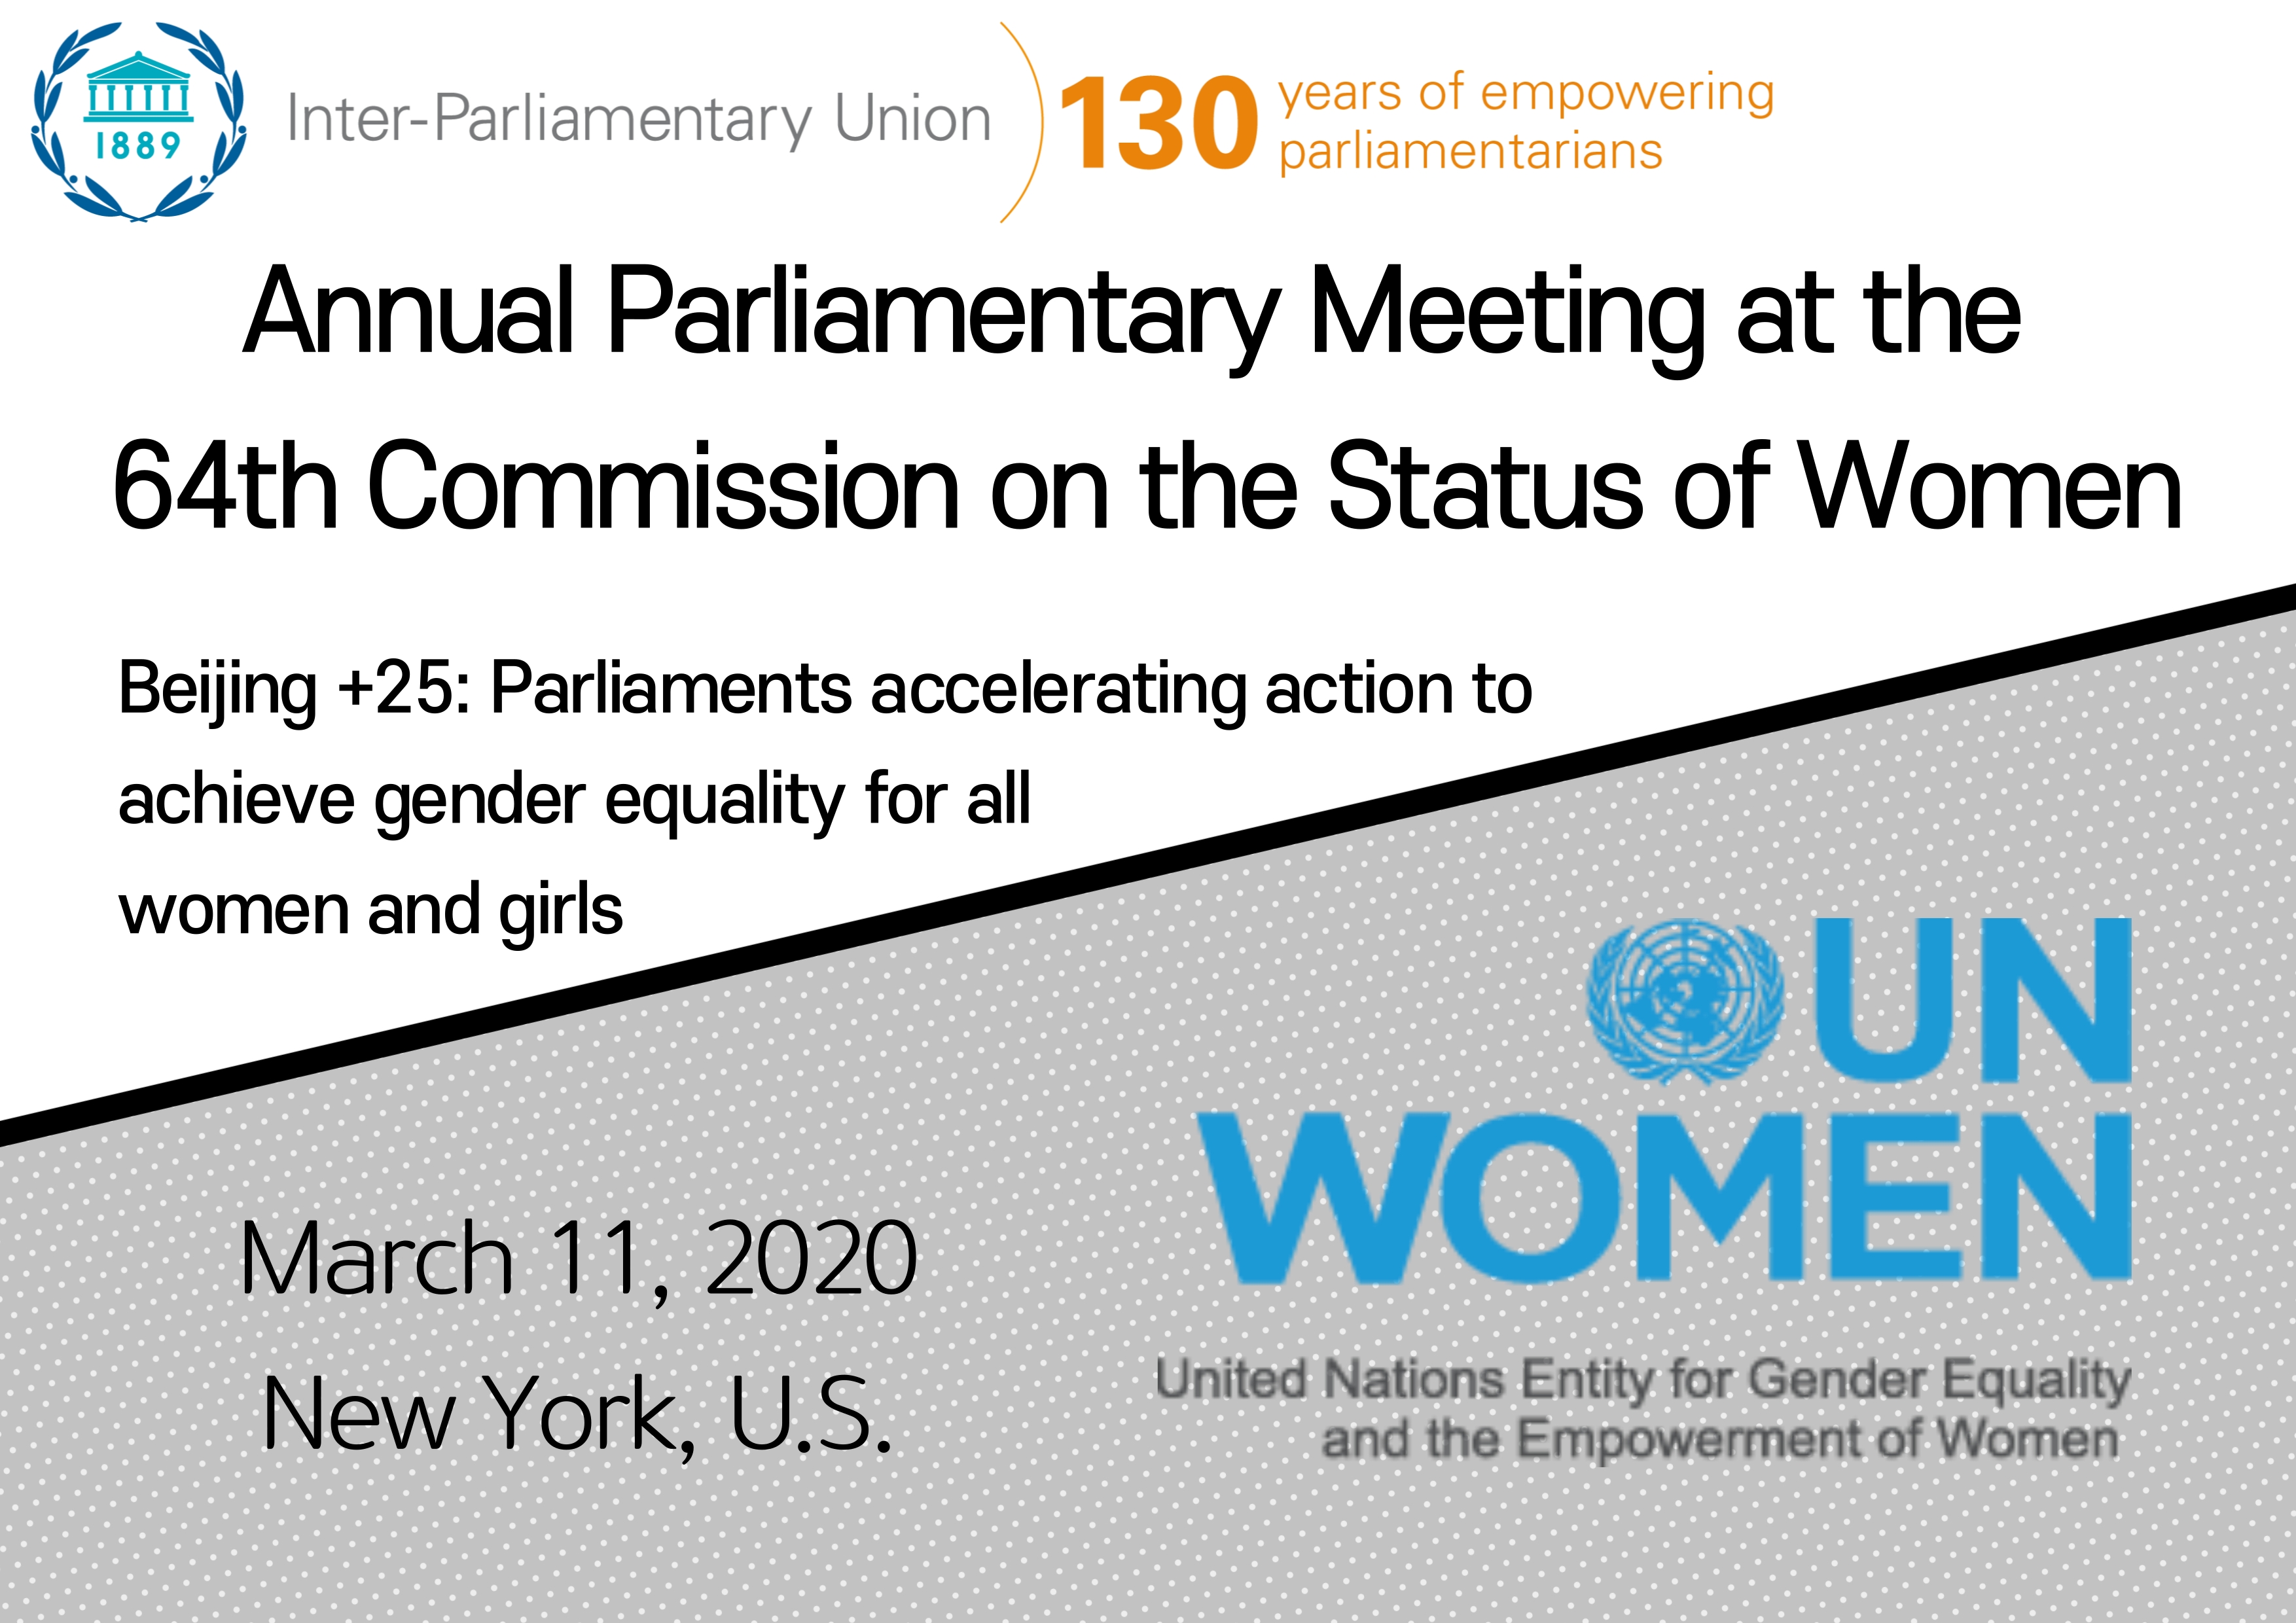 Annual Parliamentary Meeting at the 64th Commission on the Status of Women